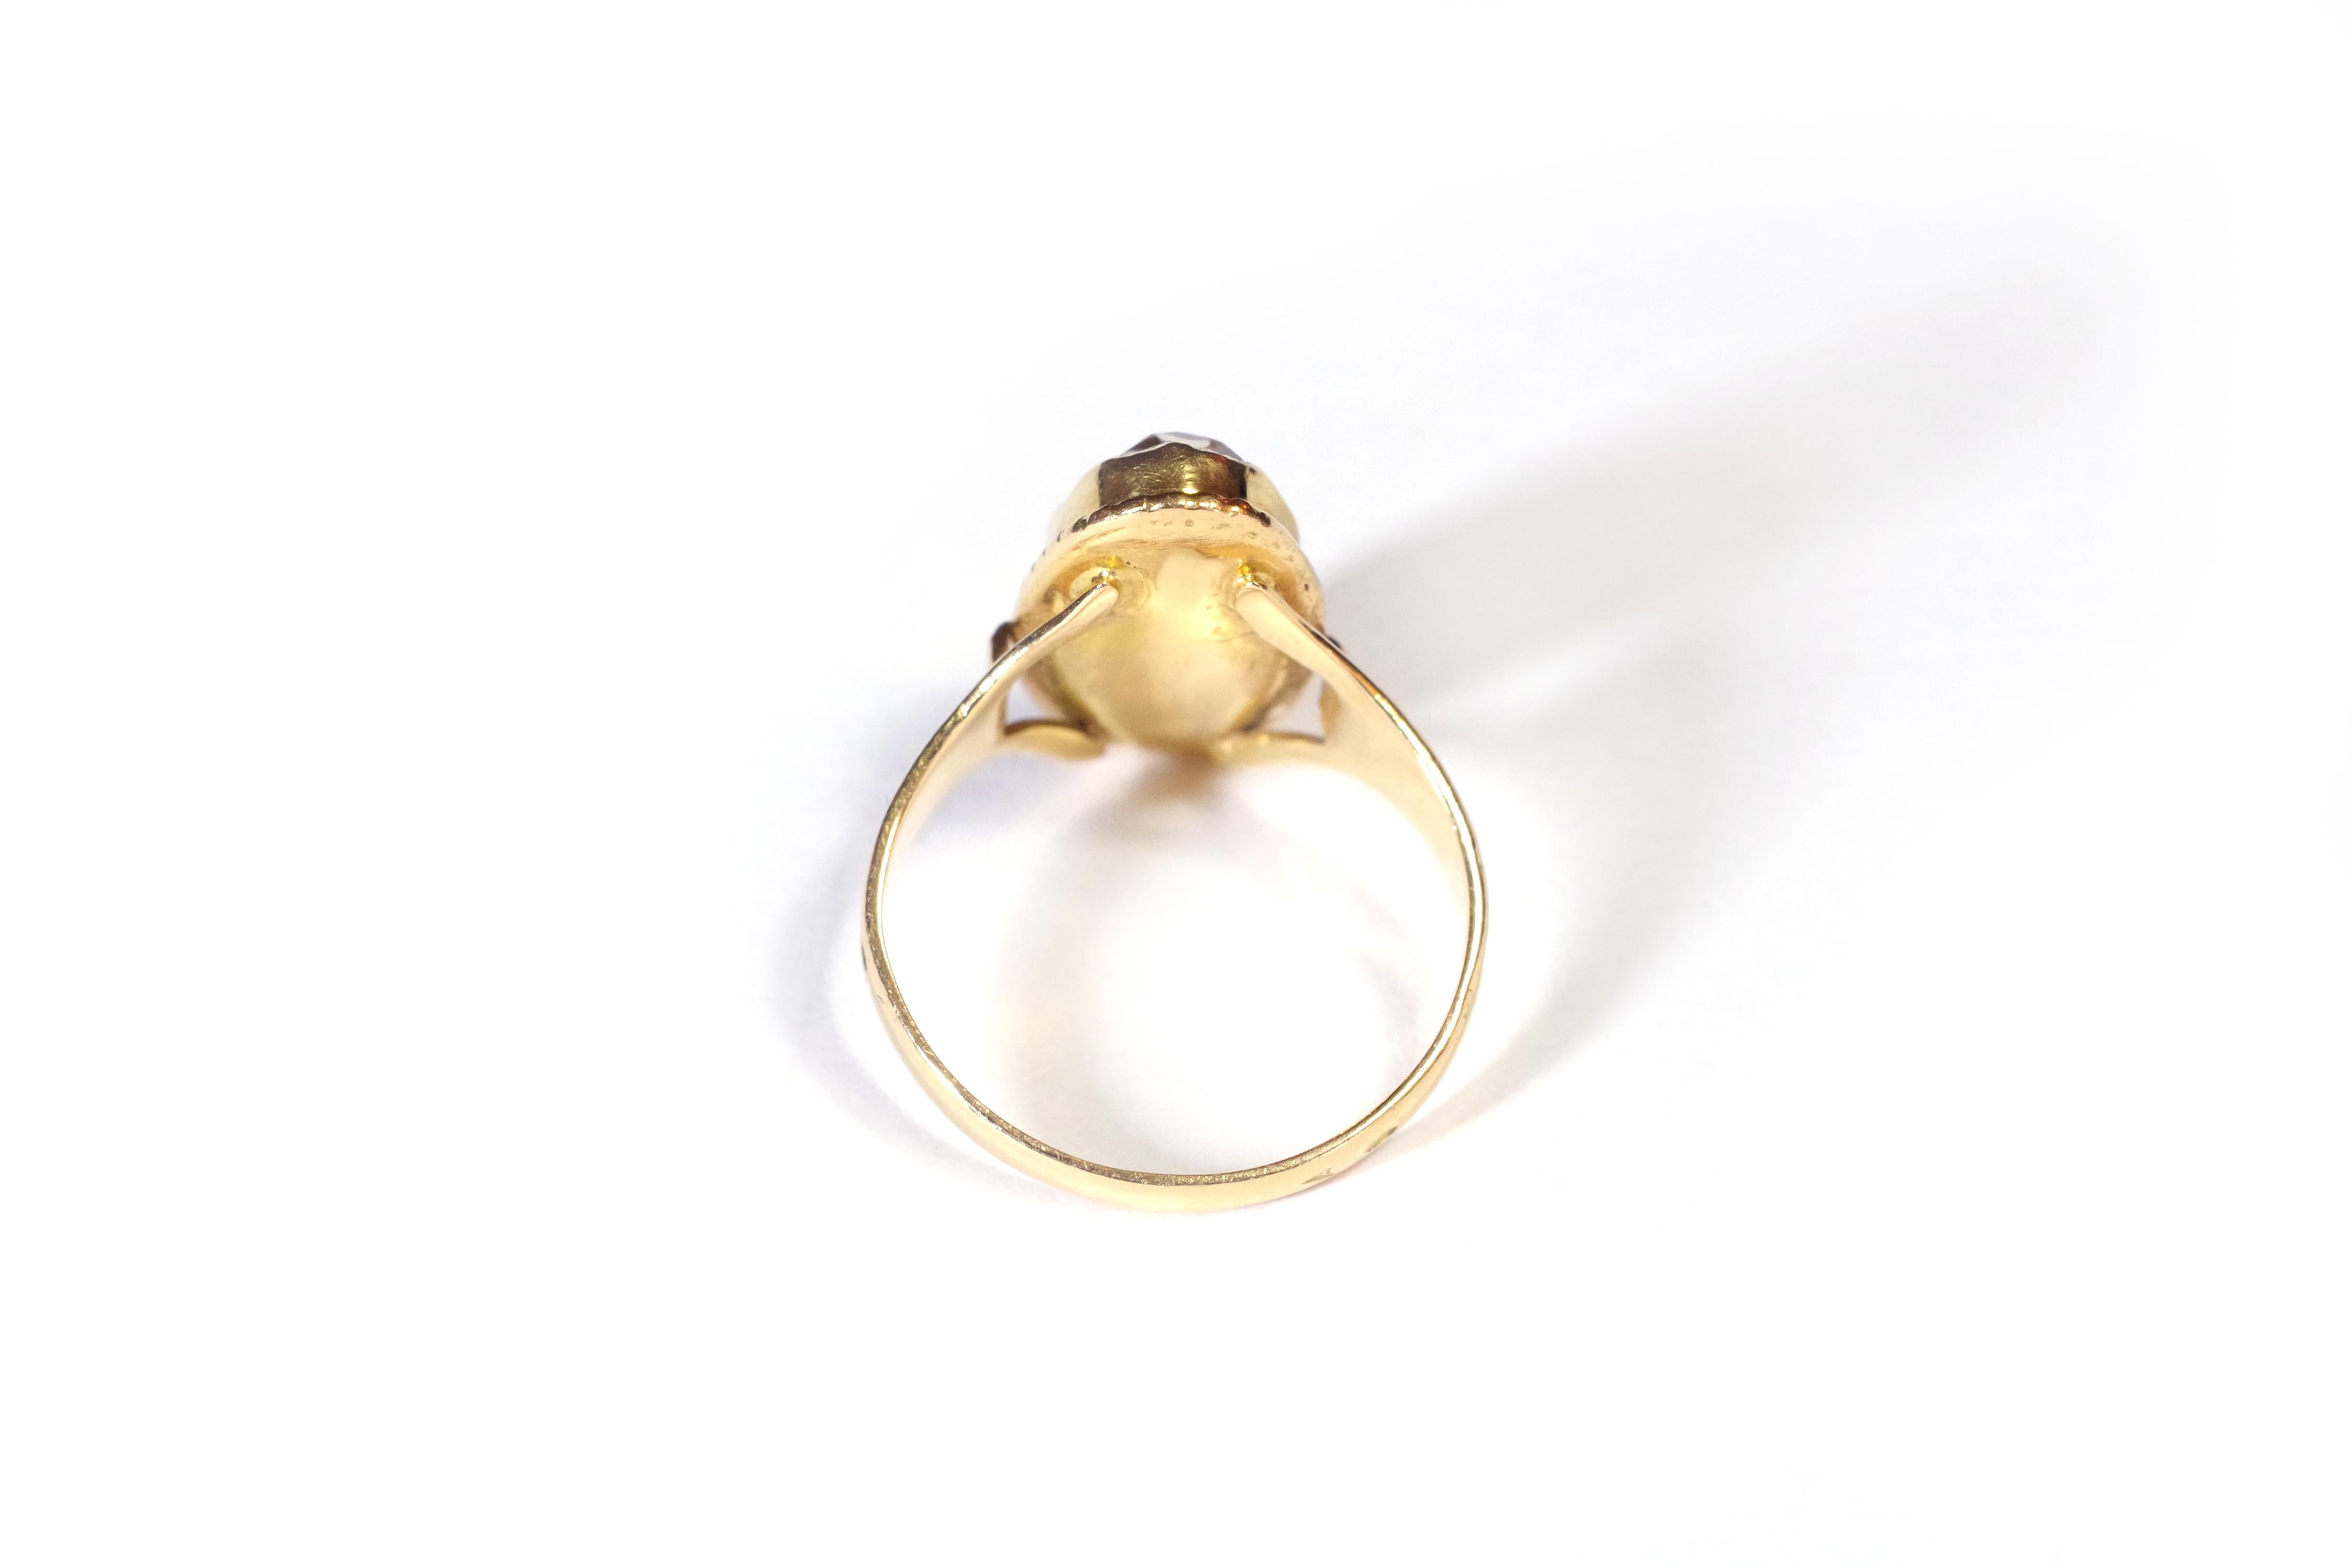 Oval Cut French Regional Citrine Ring in 18k Gold, Catalan Ring